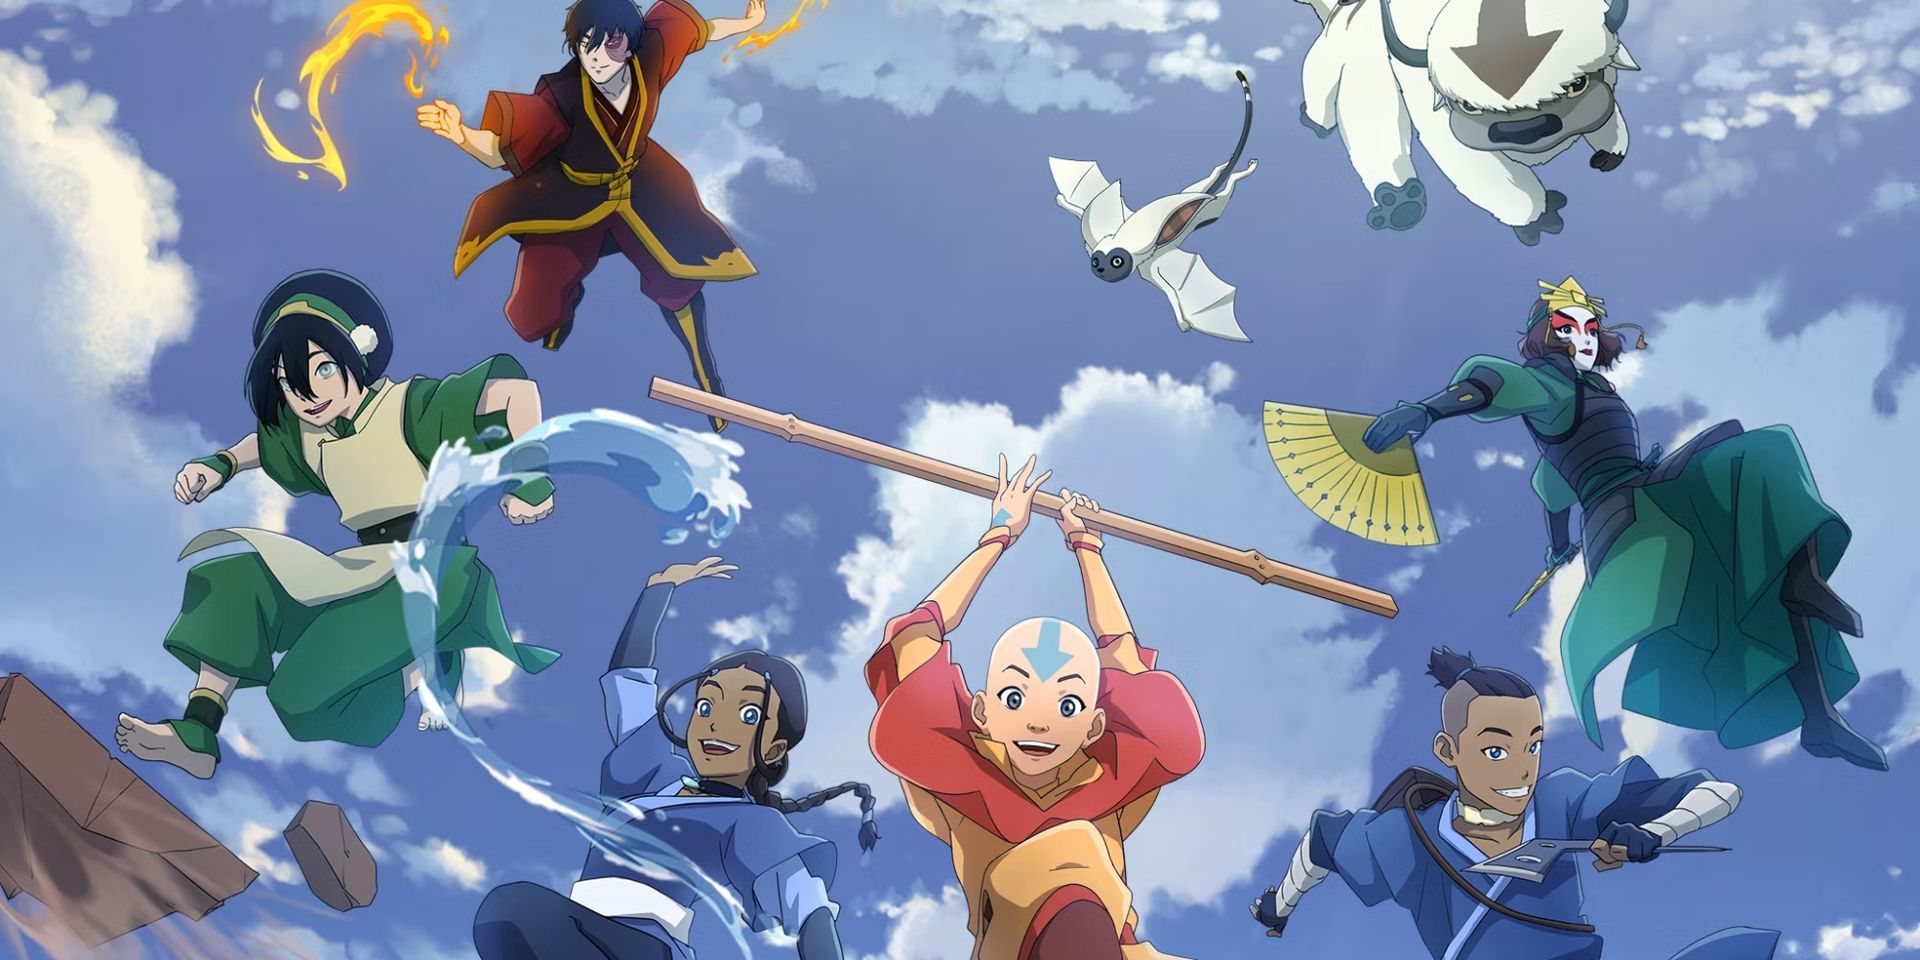 You can find the Avatar Generations codes for February 2023 in this guide. The popular Nickelodeon series Avatar: The Last Airbender is the inspiration...